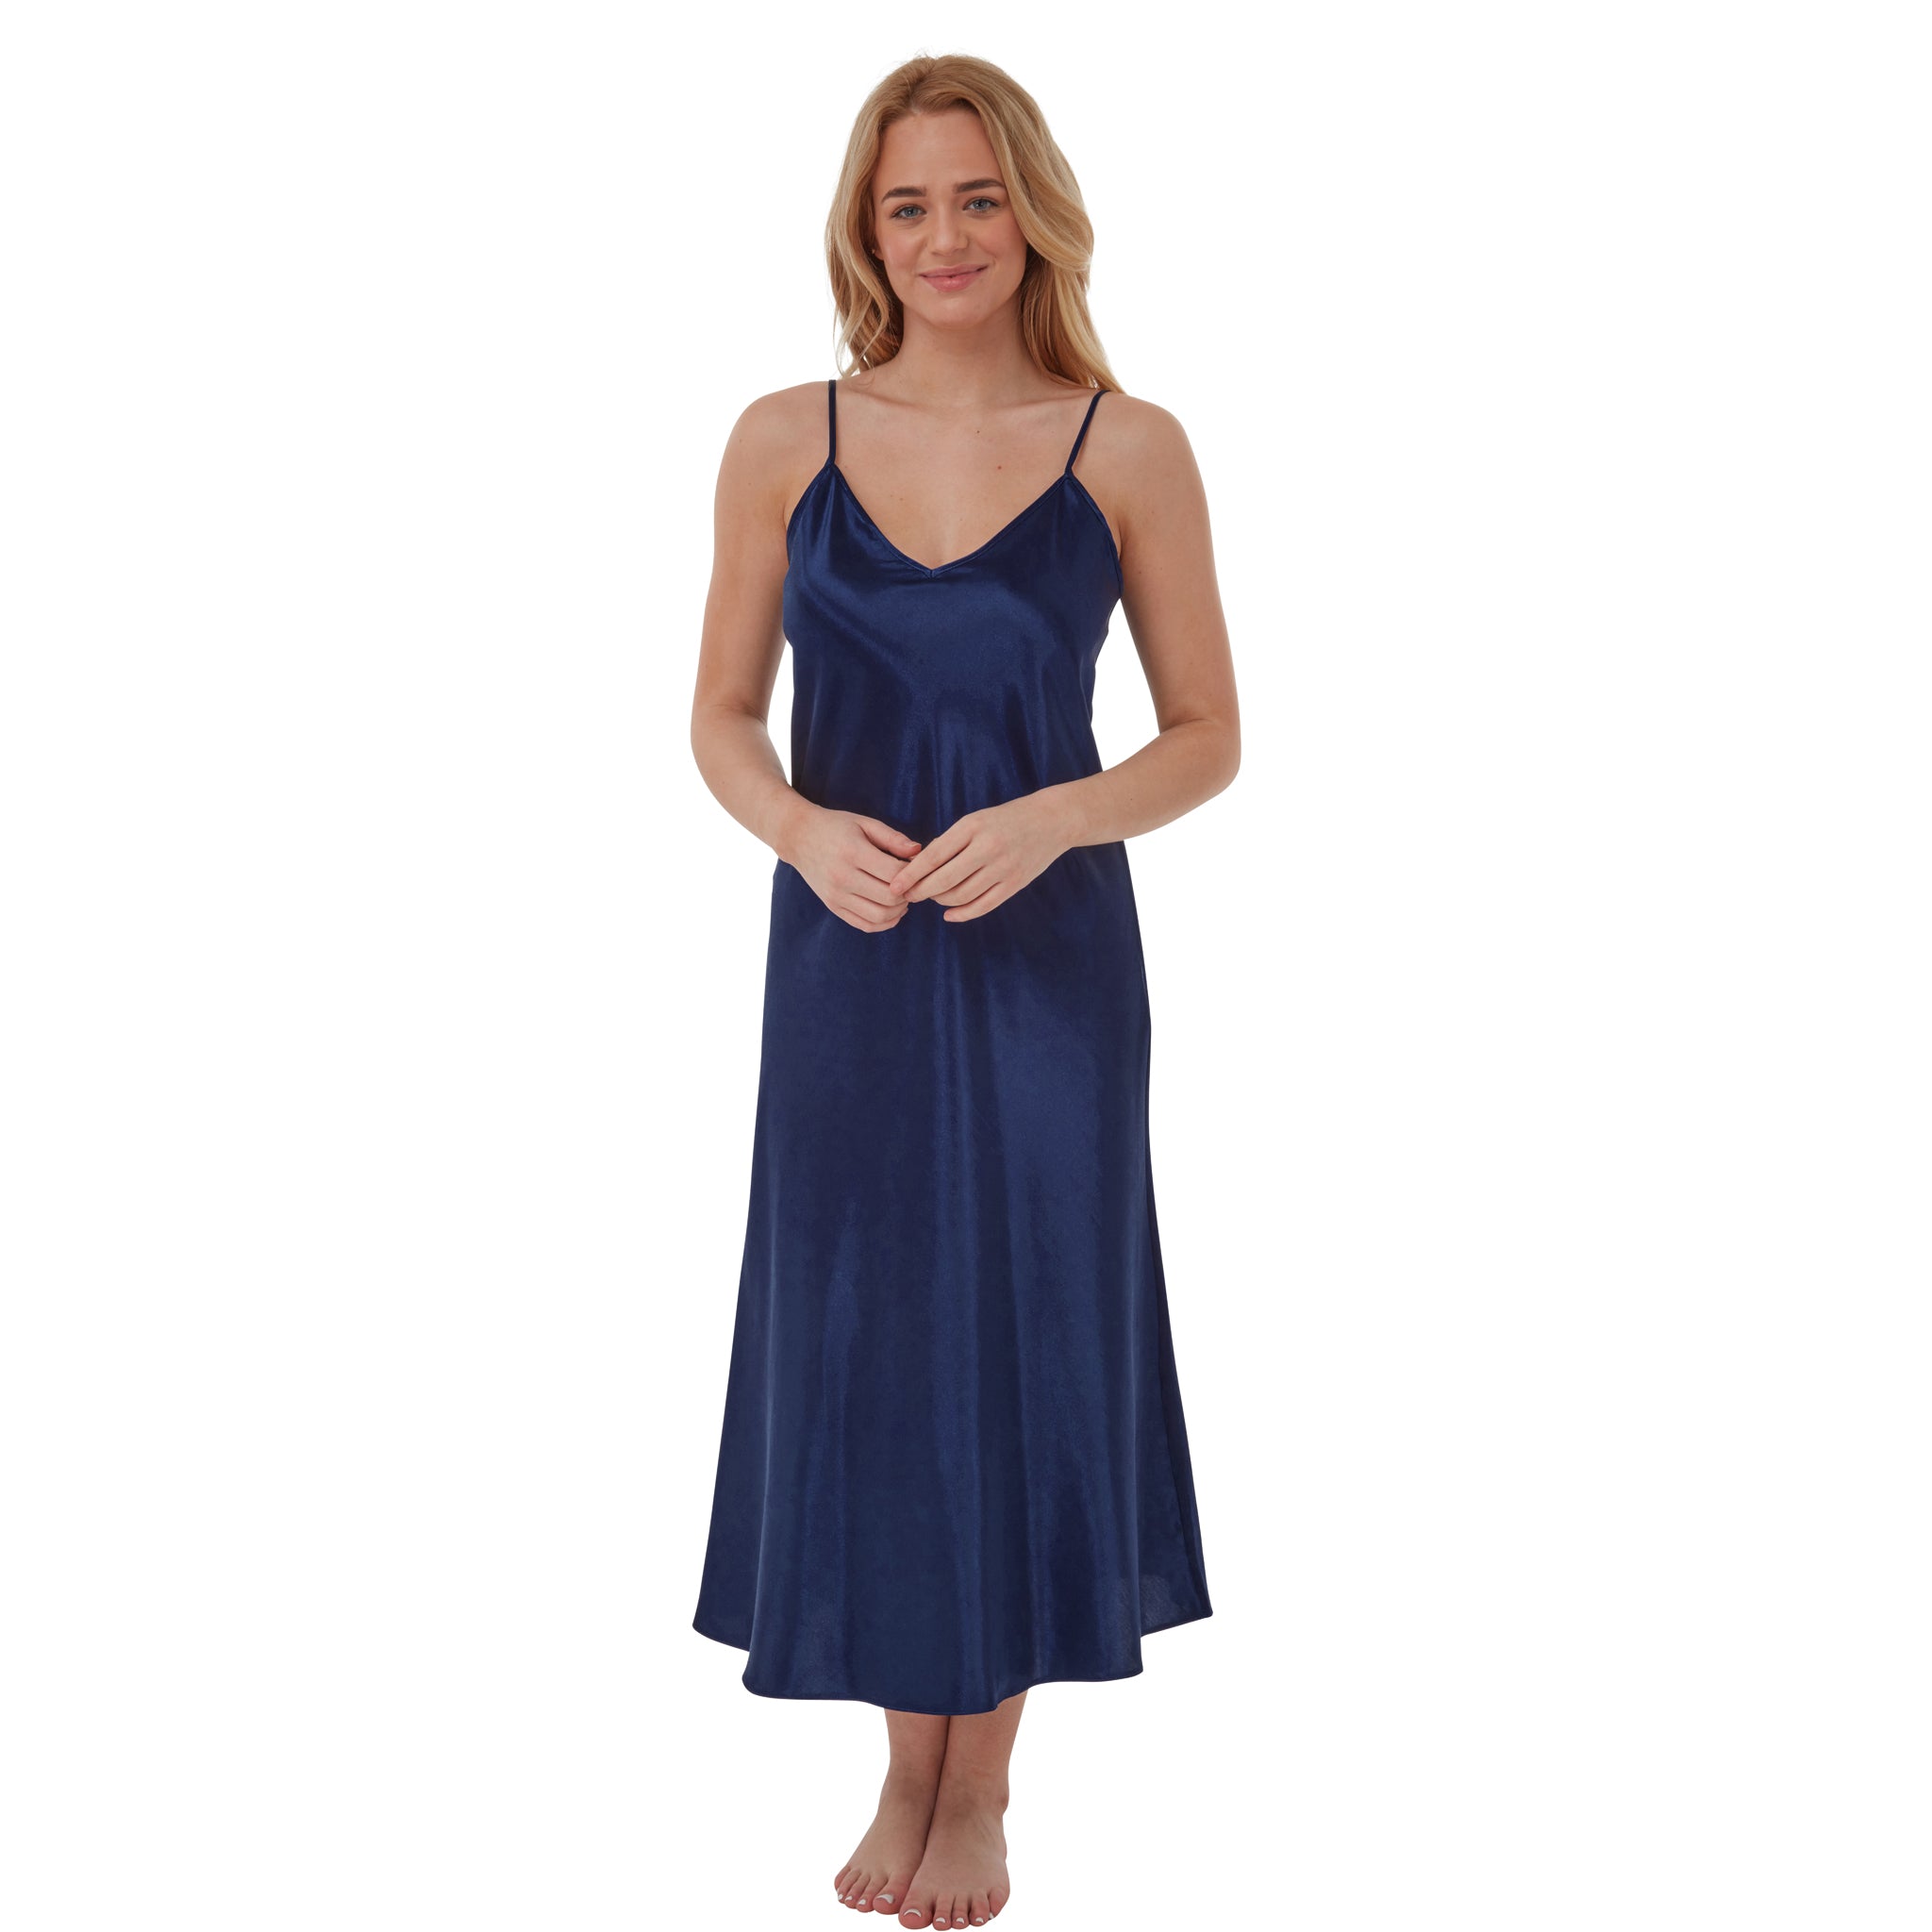 Long Full Length Navy Satin Chemise Nightdress PLUS SIZE – Just For You ...